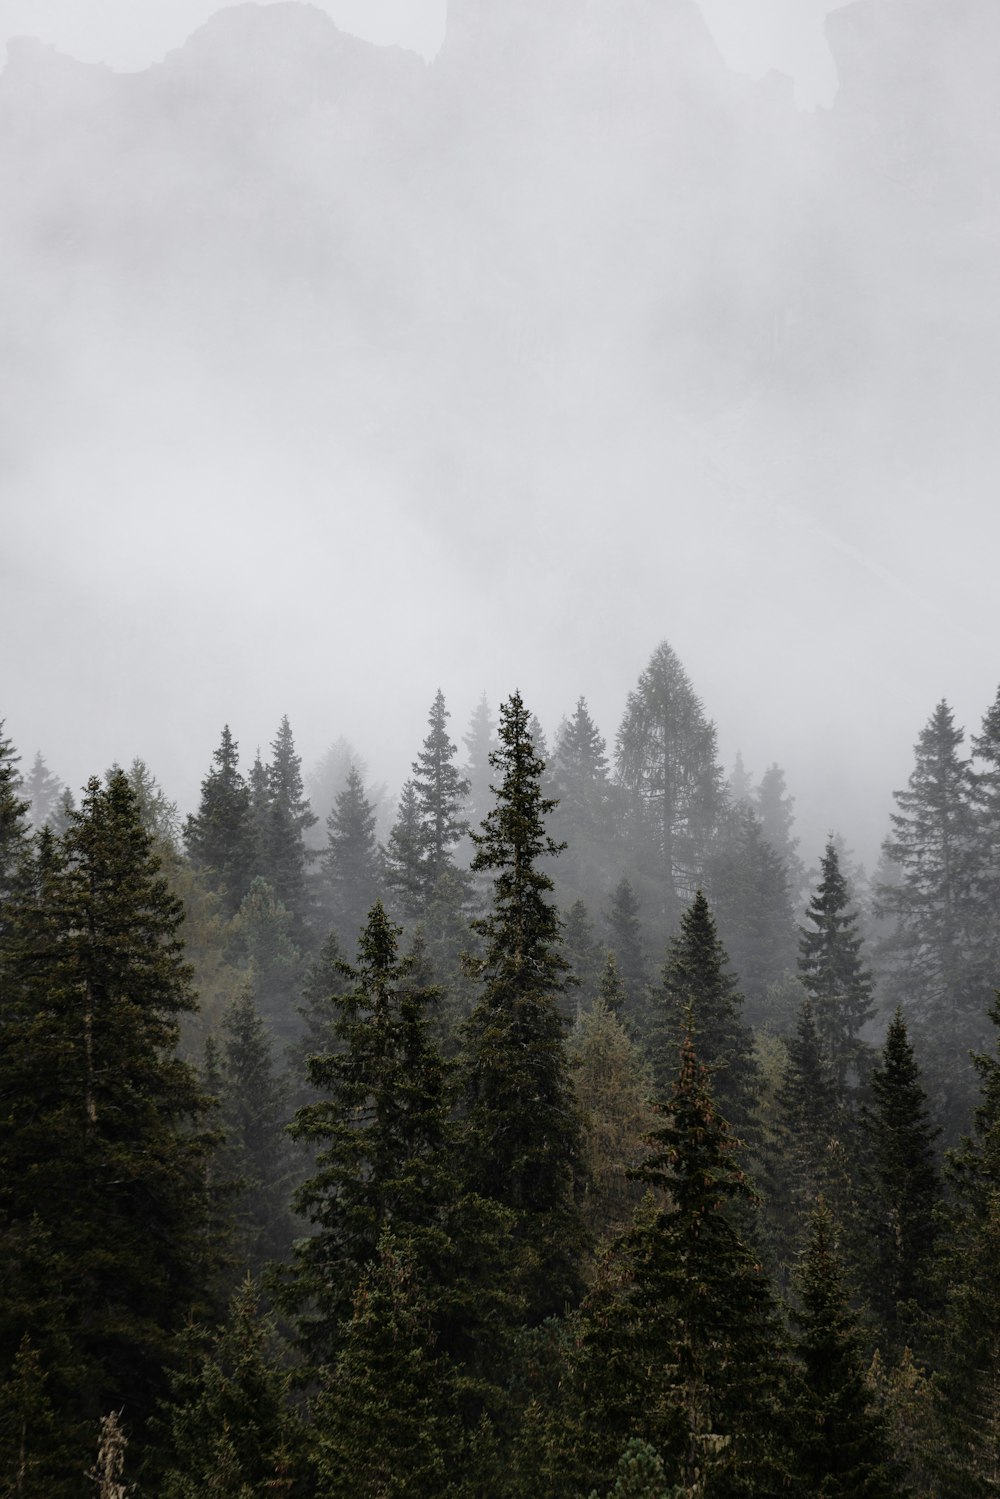 a group of pine trees in a foggy forest